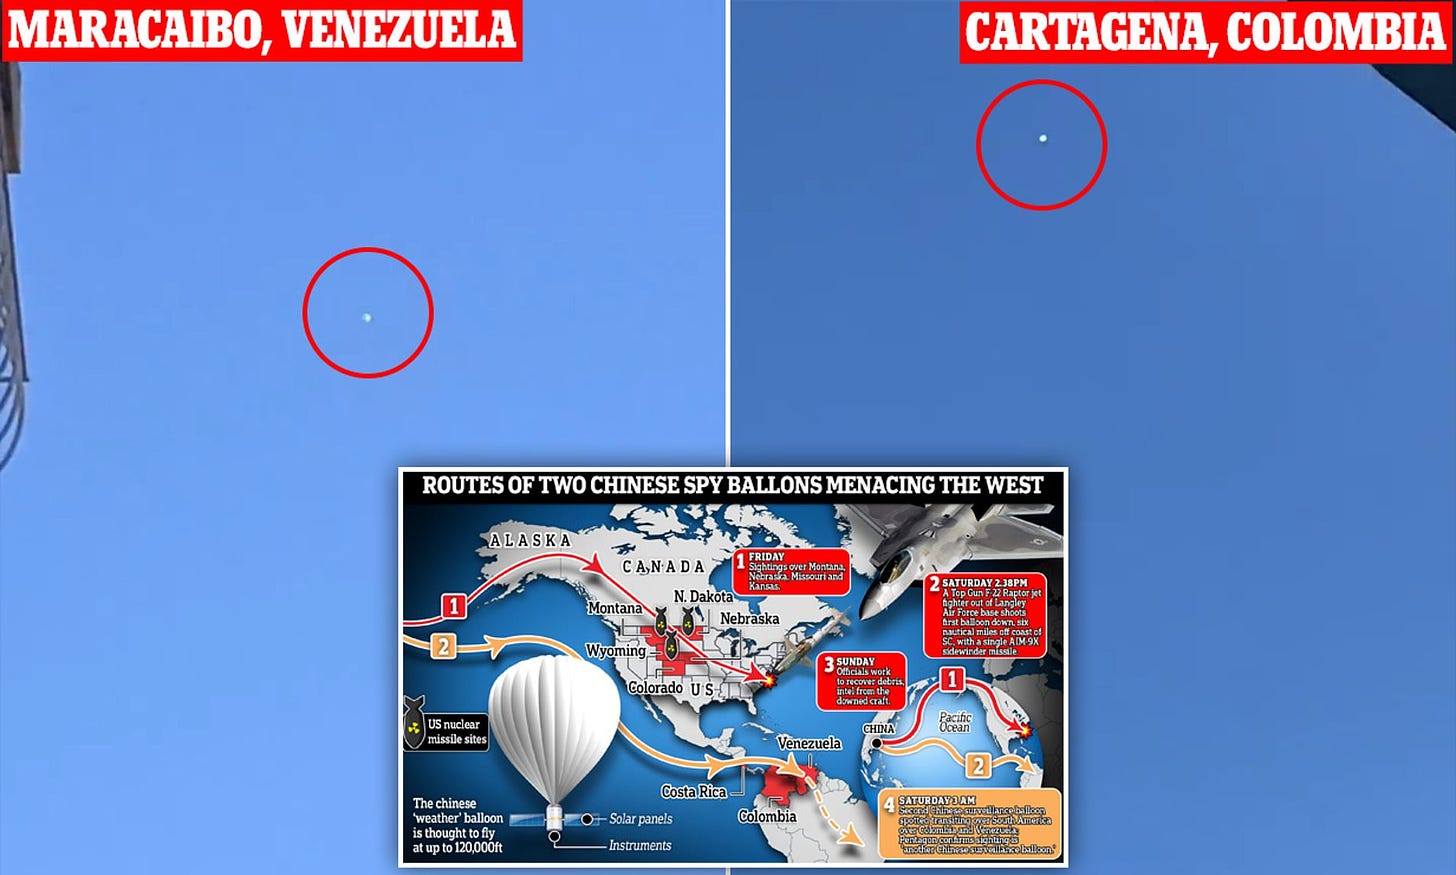 Colombia releases more details about second Chinese spy balloon hovering  over Latin America | Daily Mail Online